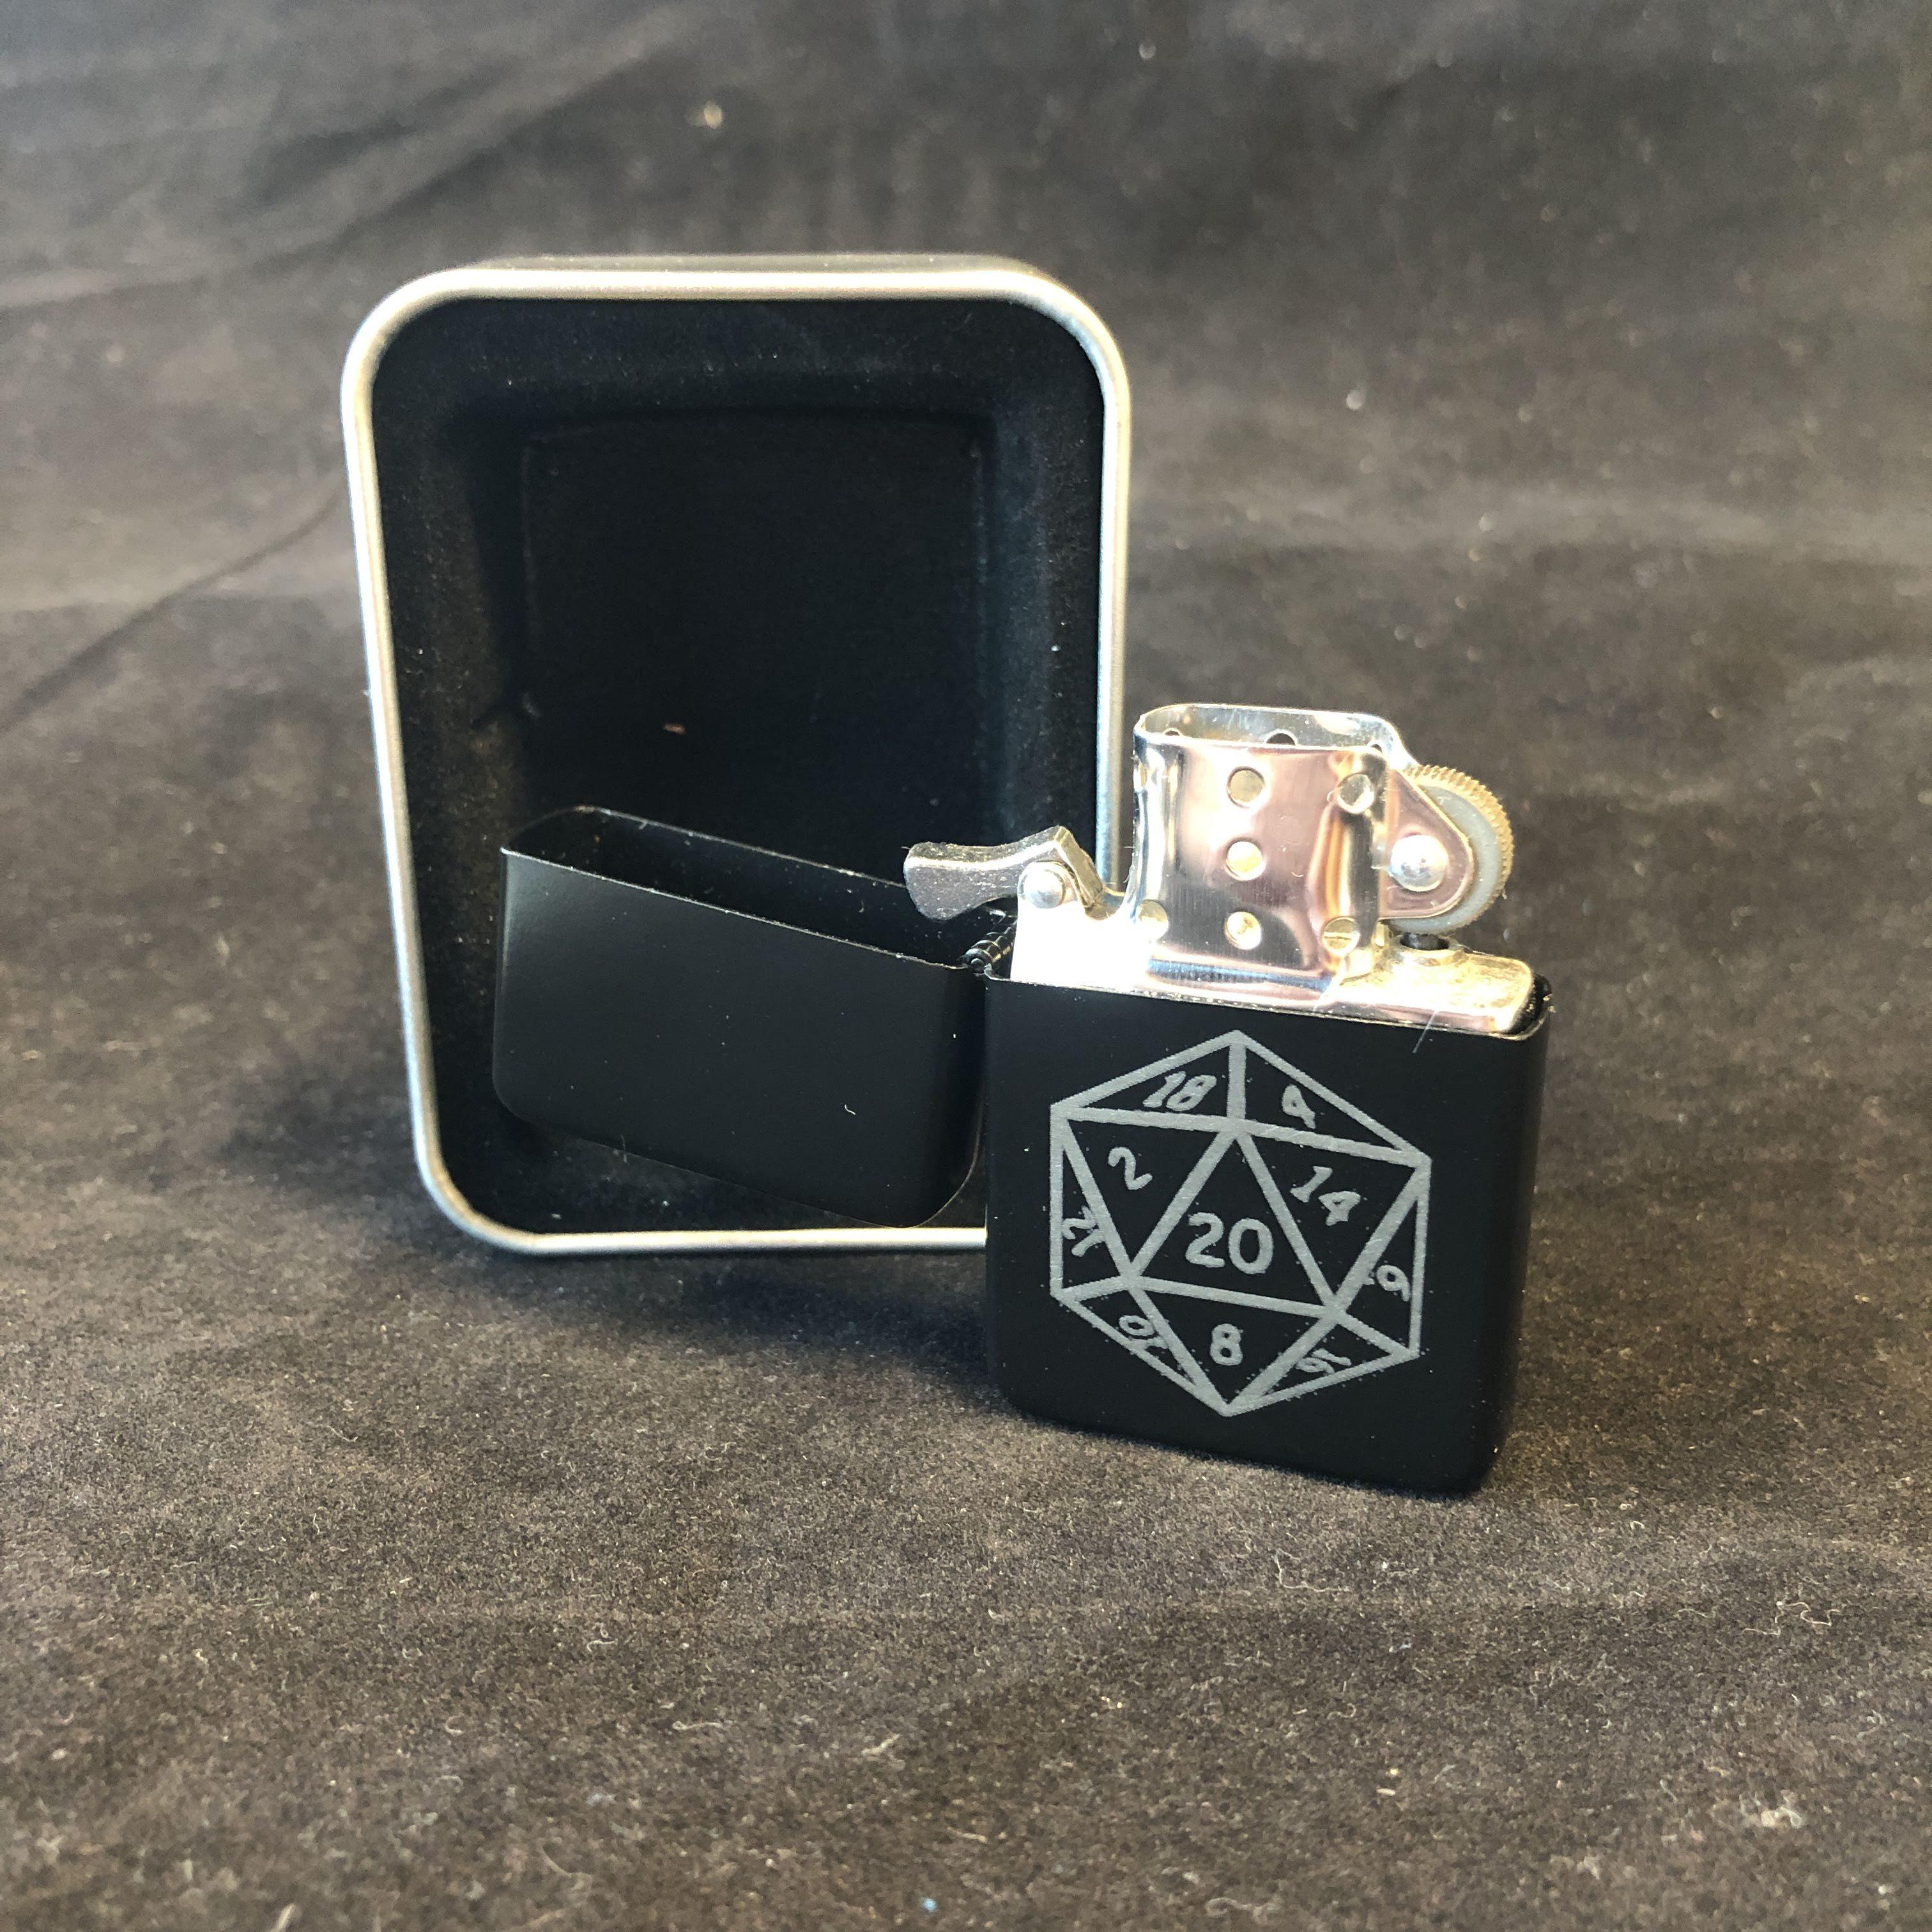 D20 Dungeons and Dragons theme laser engraved lighter: Red Berry Crafts$(product_title) $(shop_name)